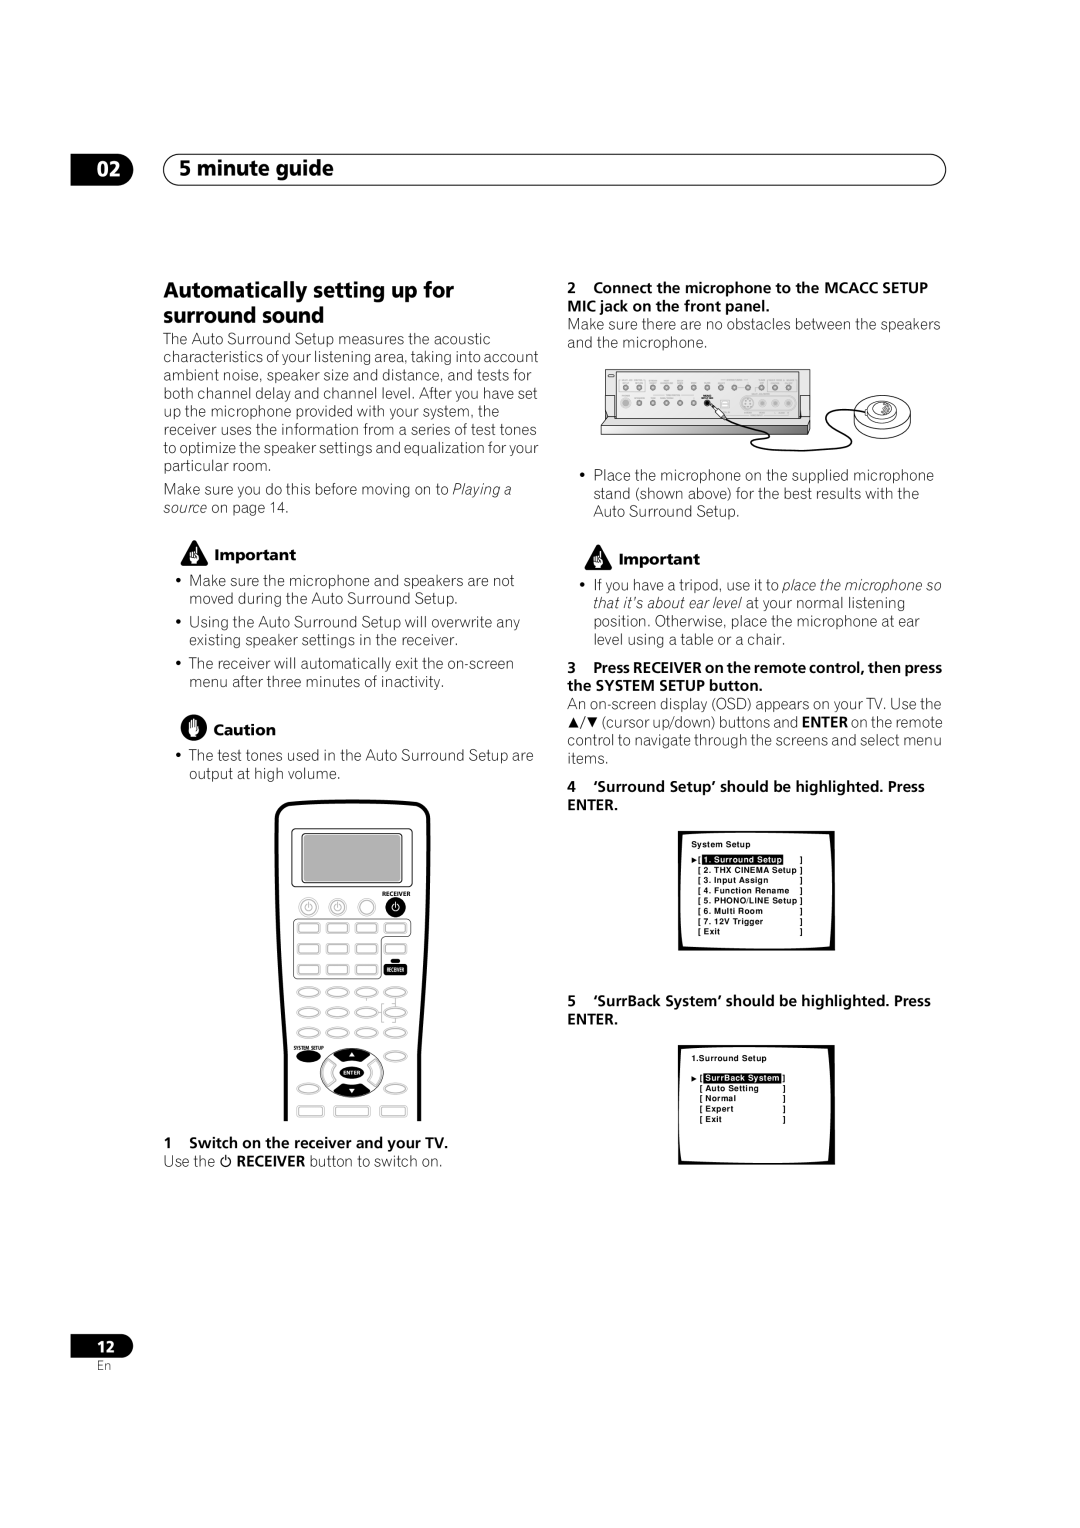 Pioneer VSX-9300TX manual Automatically setting up for surround sound, minute guide, Enter 